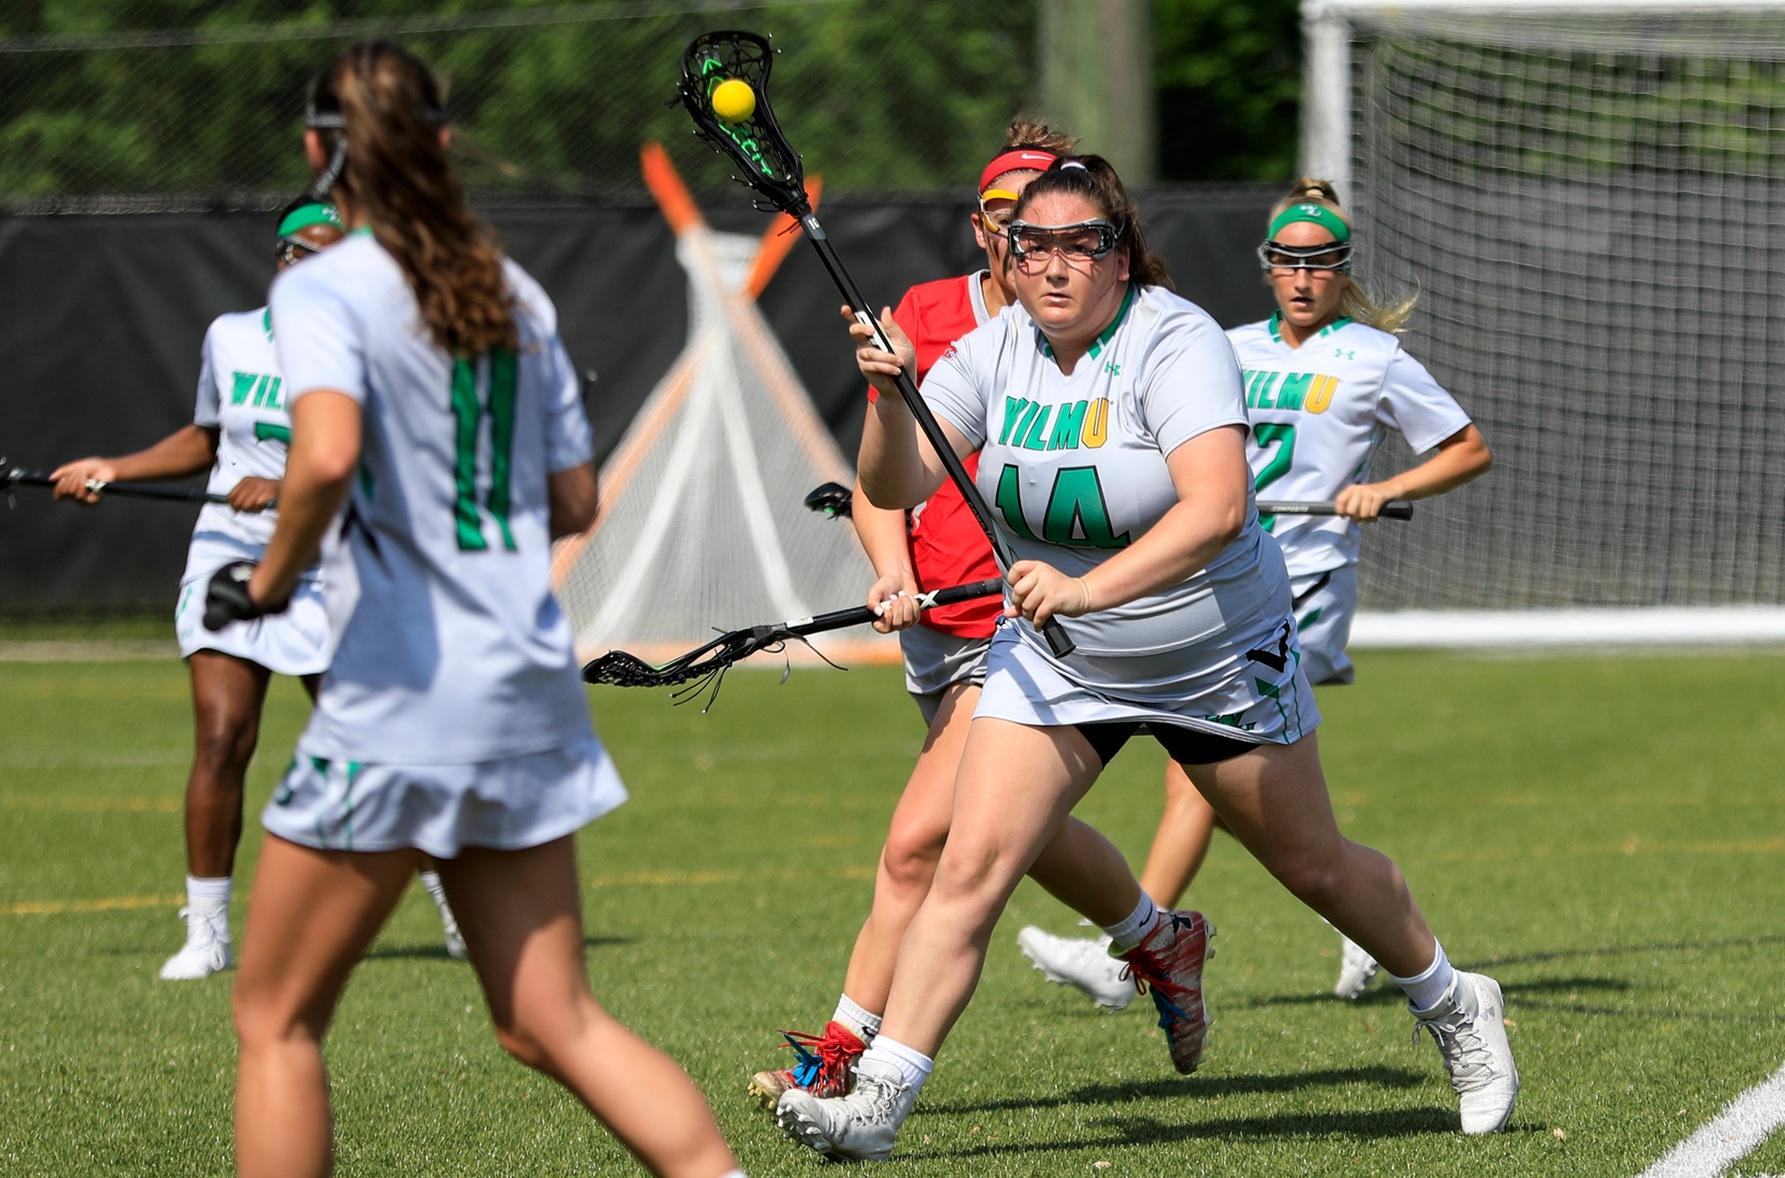 Wilmington University vs Chestnut Hill University Women's Lacrosse Game on 04/30/29 @Wilmington University's Sports Complex in Bear Delaware 
Photographed by Christopher J. Vitale of Bear Delaware.